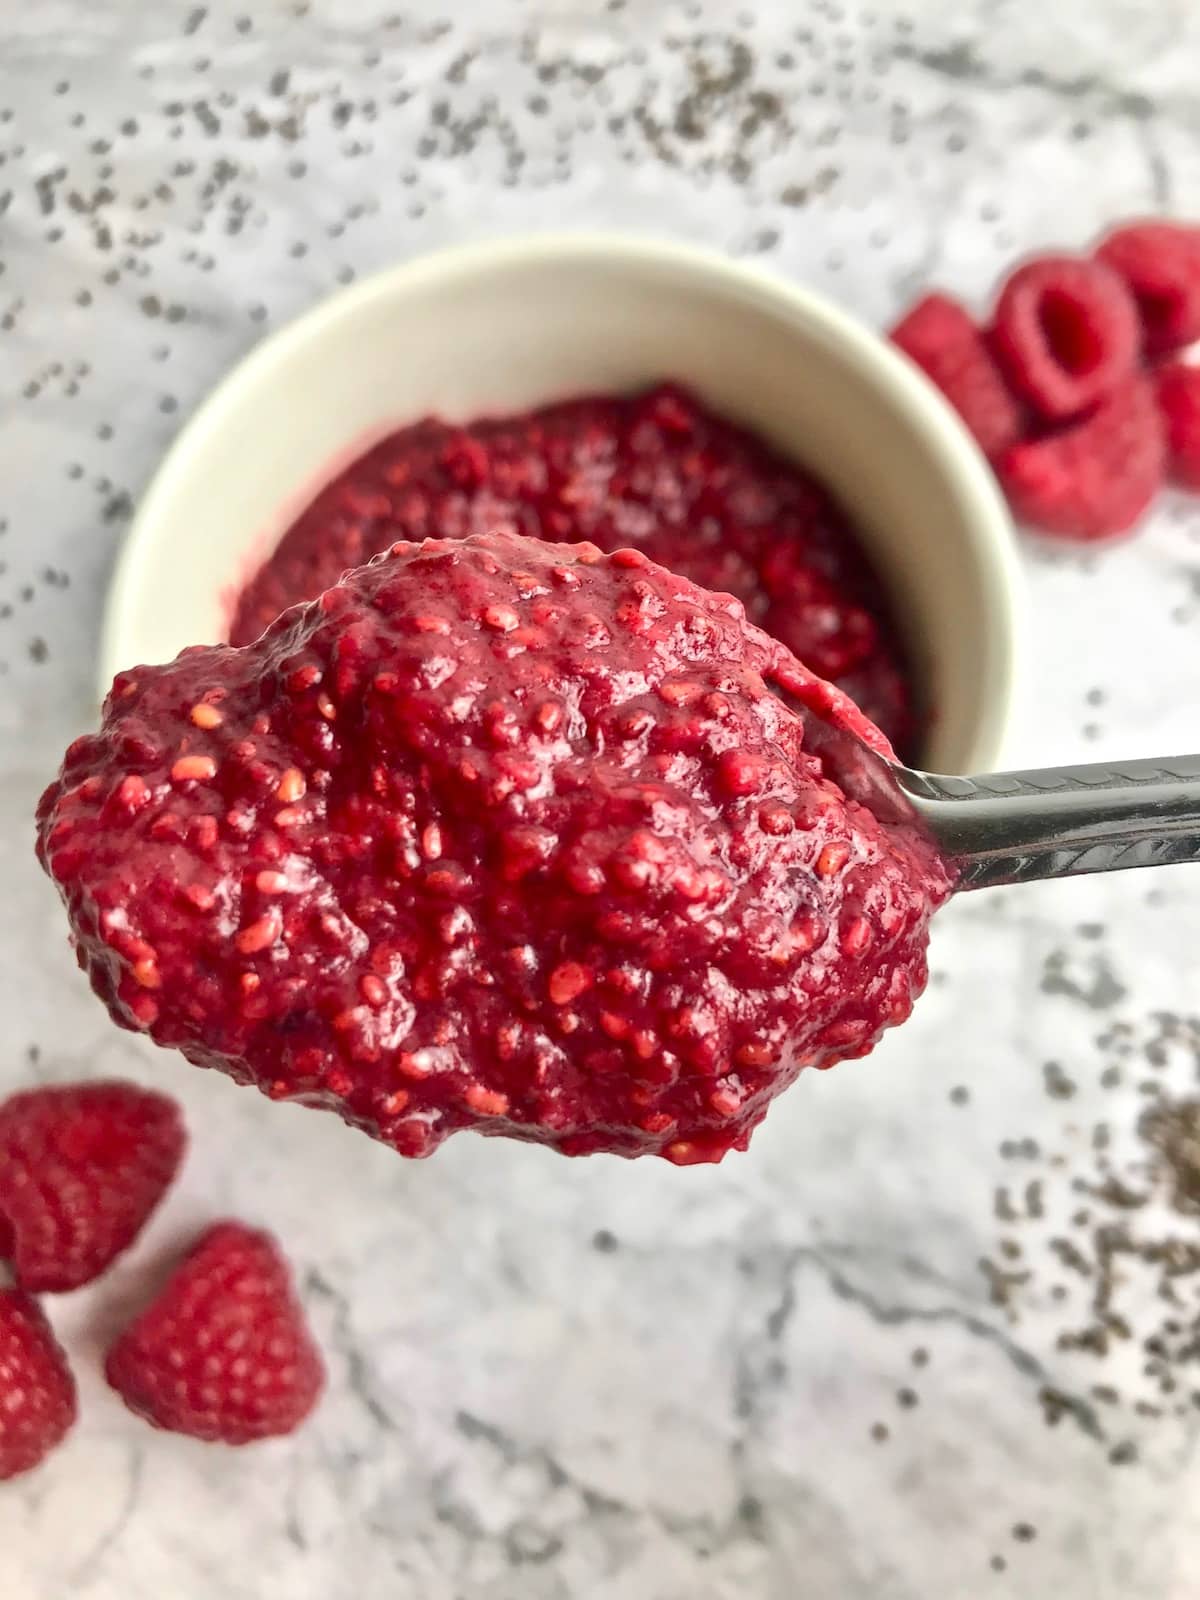 Spoonful of jam with raspberries and chia seeds on the table in the background.